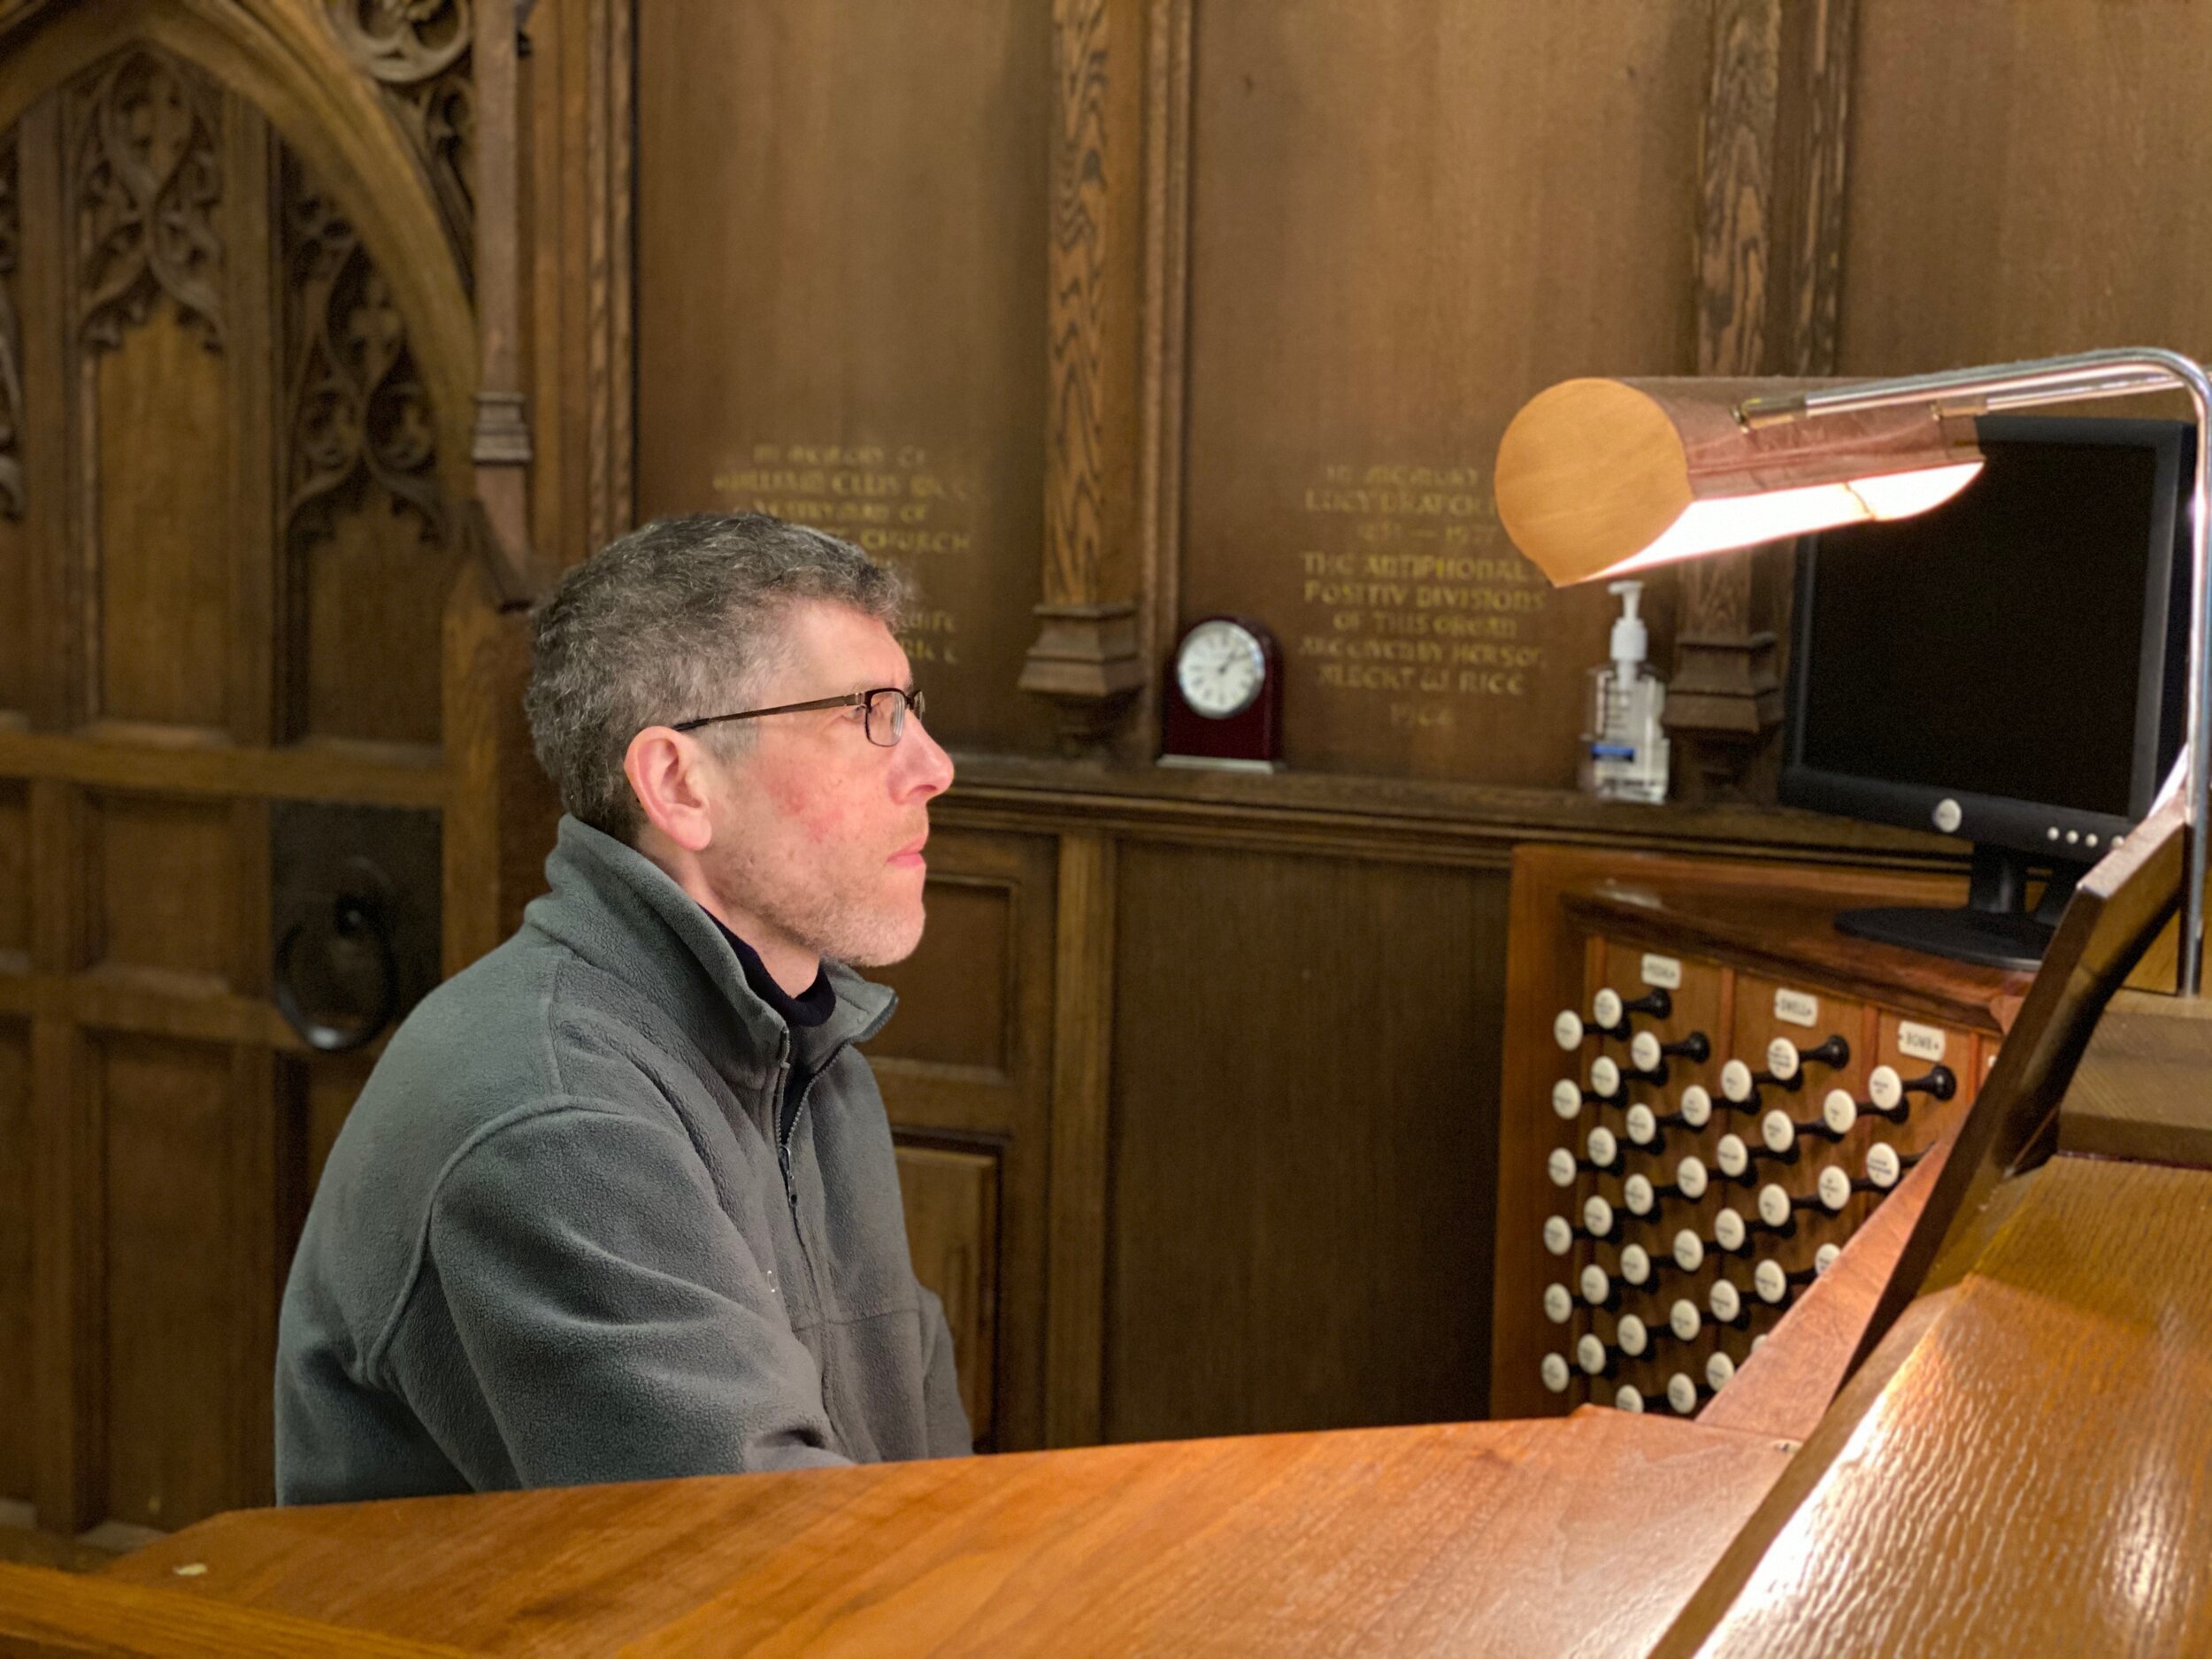 Chris Porter at the console of the Aeolian-Skinner organ, All Saints Church, Worcester, Mass. 